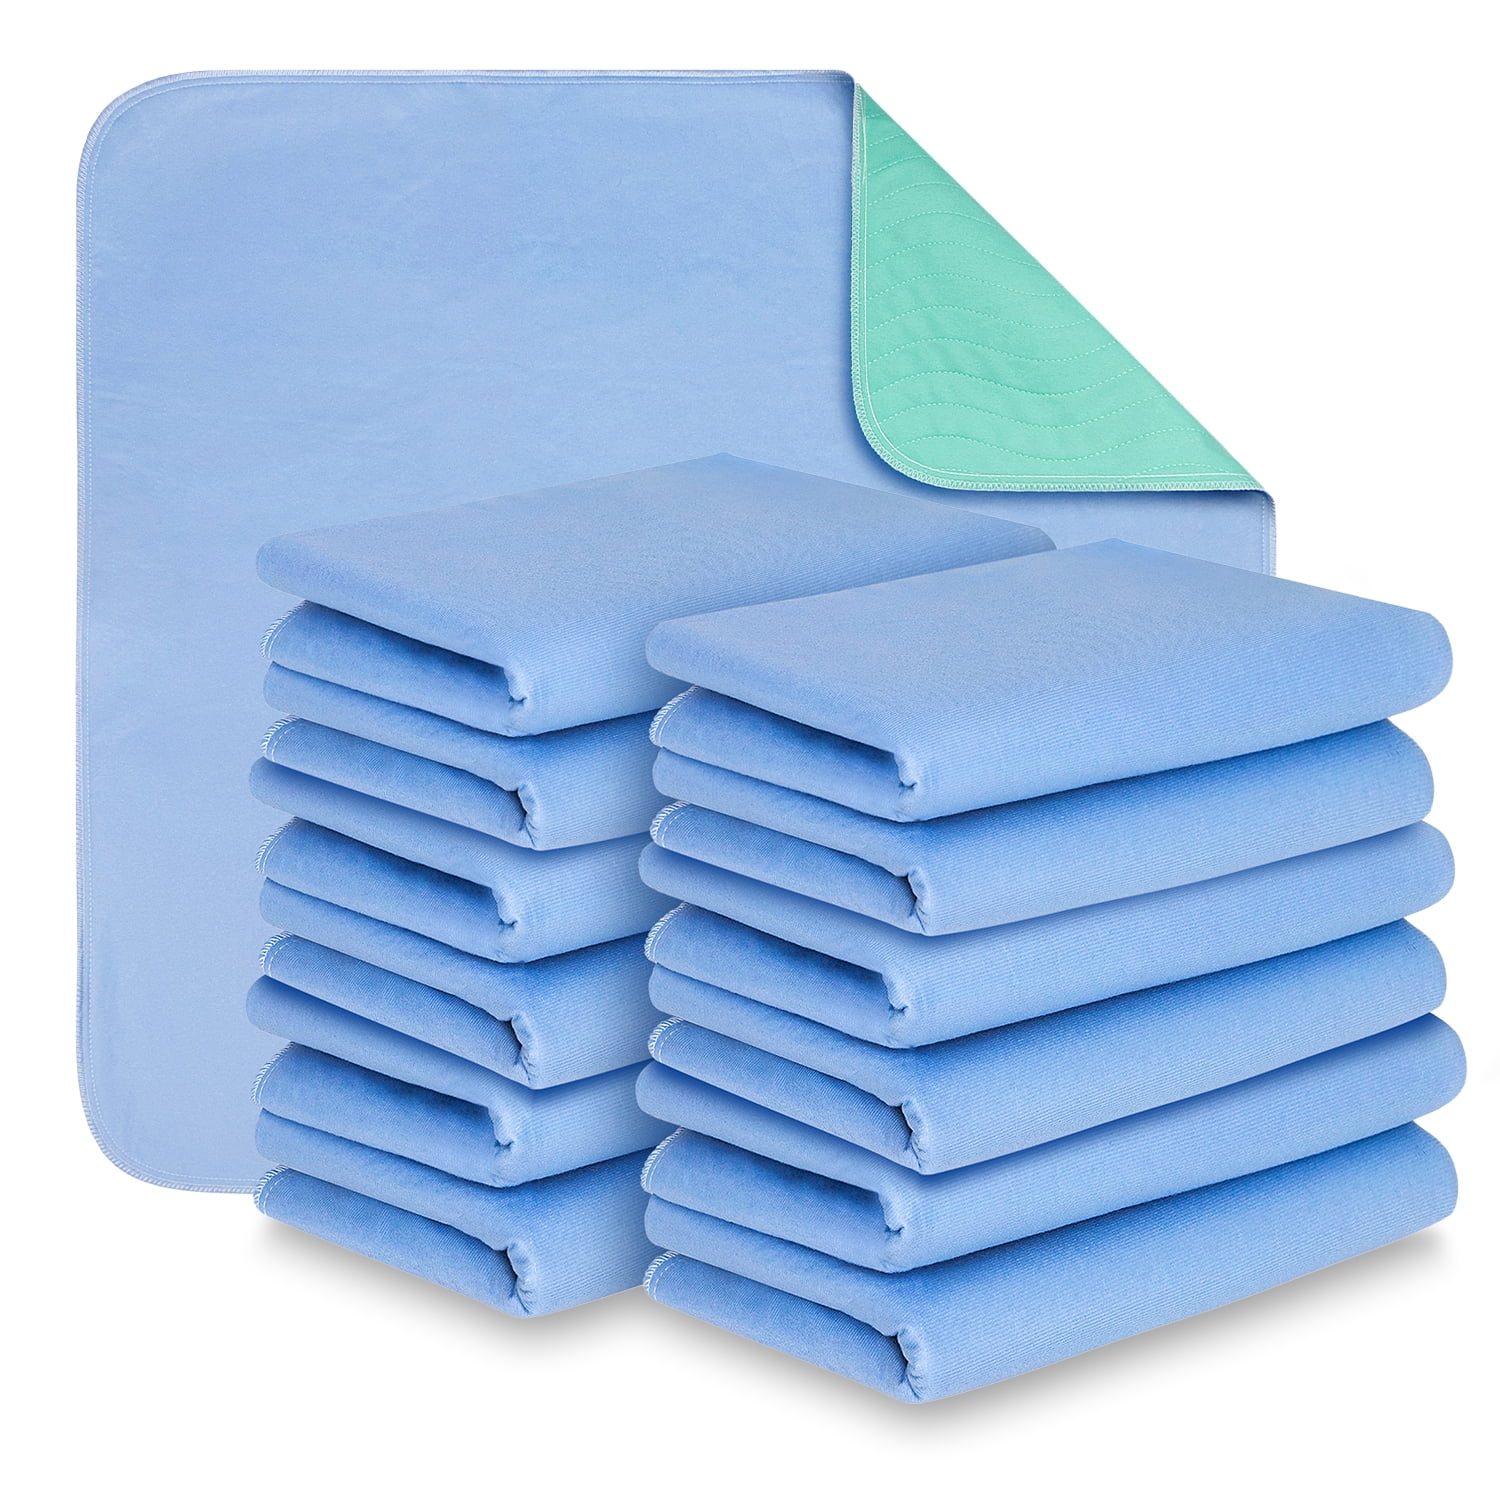 Hearth & Harbor Reusable & Washable Incontinence Bed Pads, Waterproof  Protective Underpads, 34 x 36, 1 Pack 